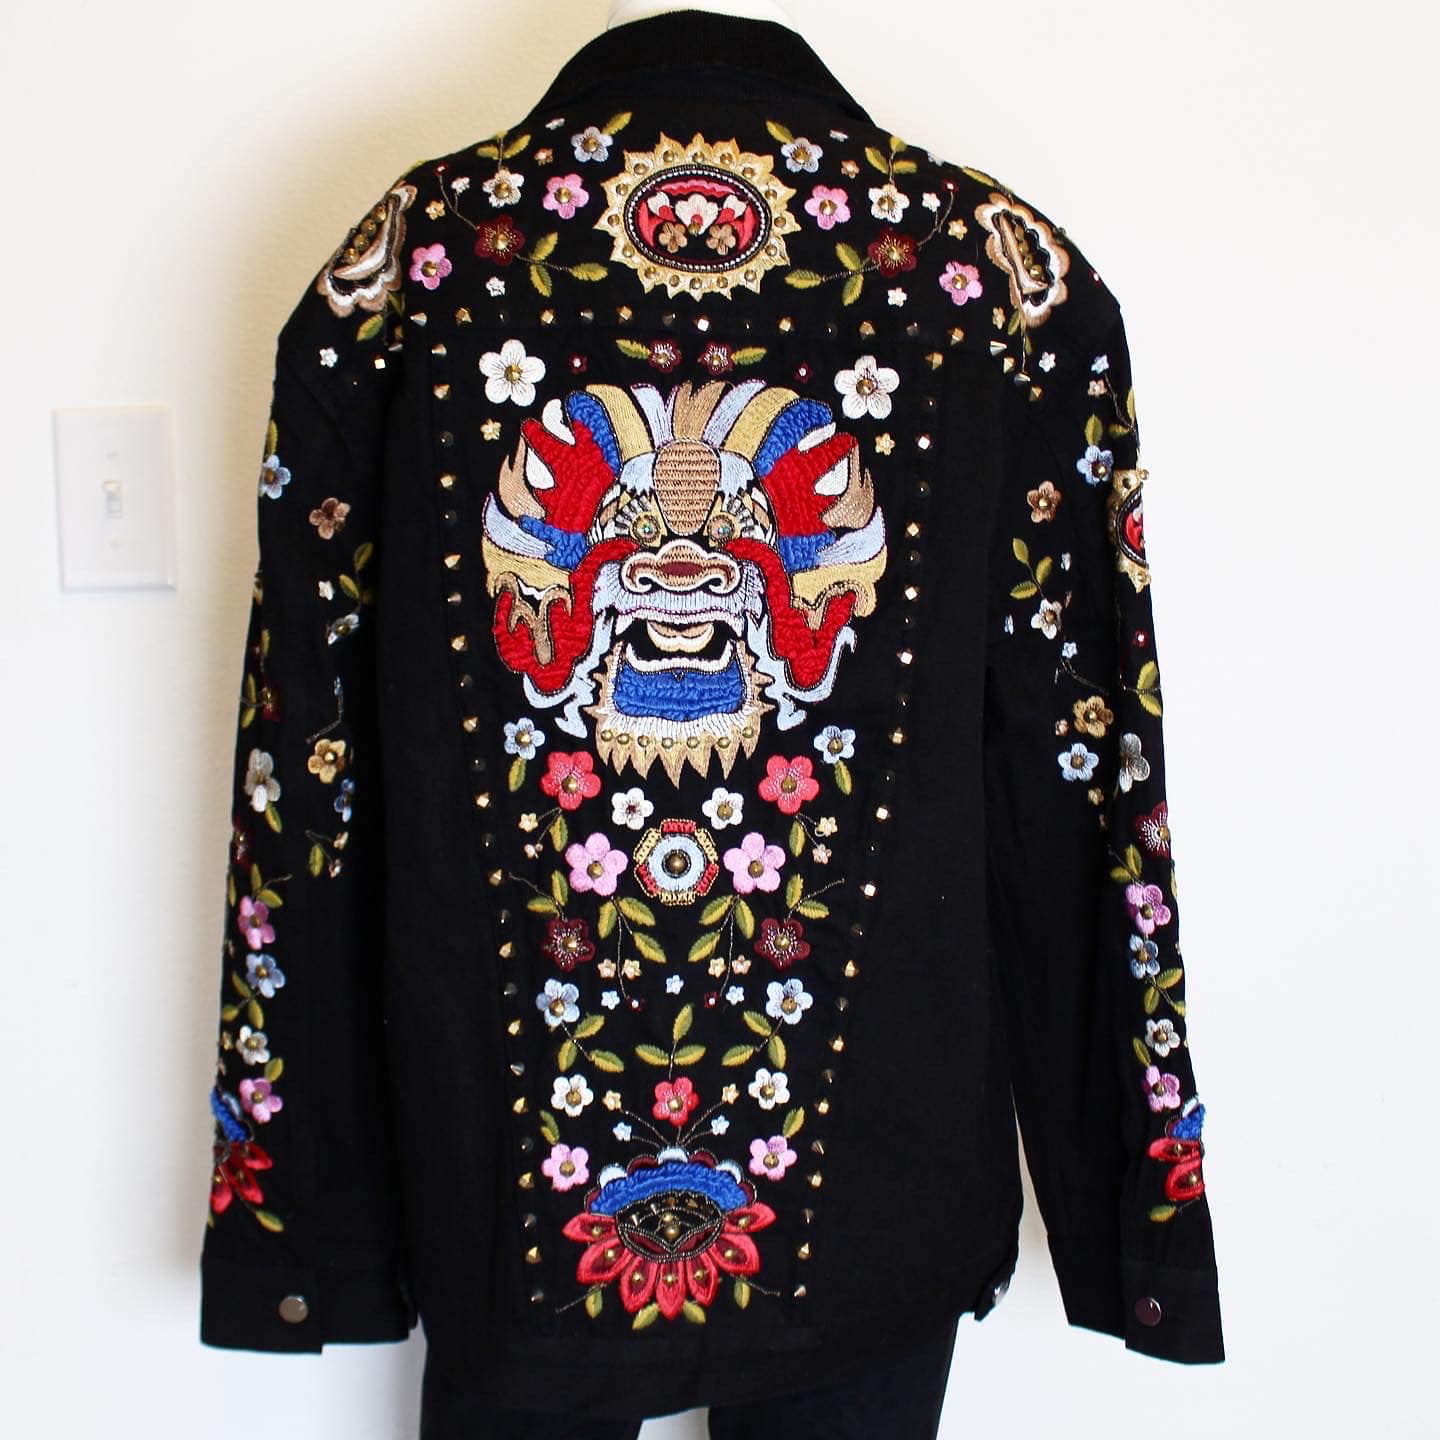 FRENCH CONNECTION Embroidered Black Denim Jacket Size 8 item 41036 b